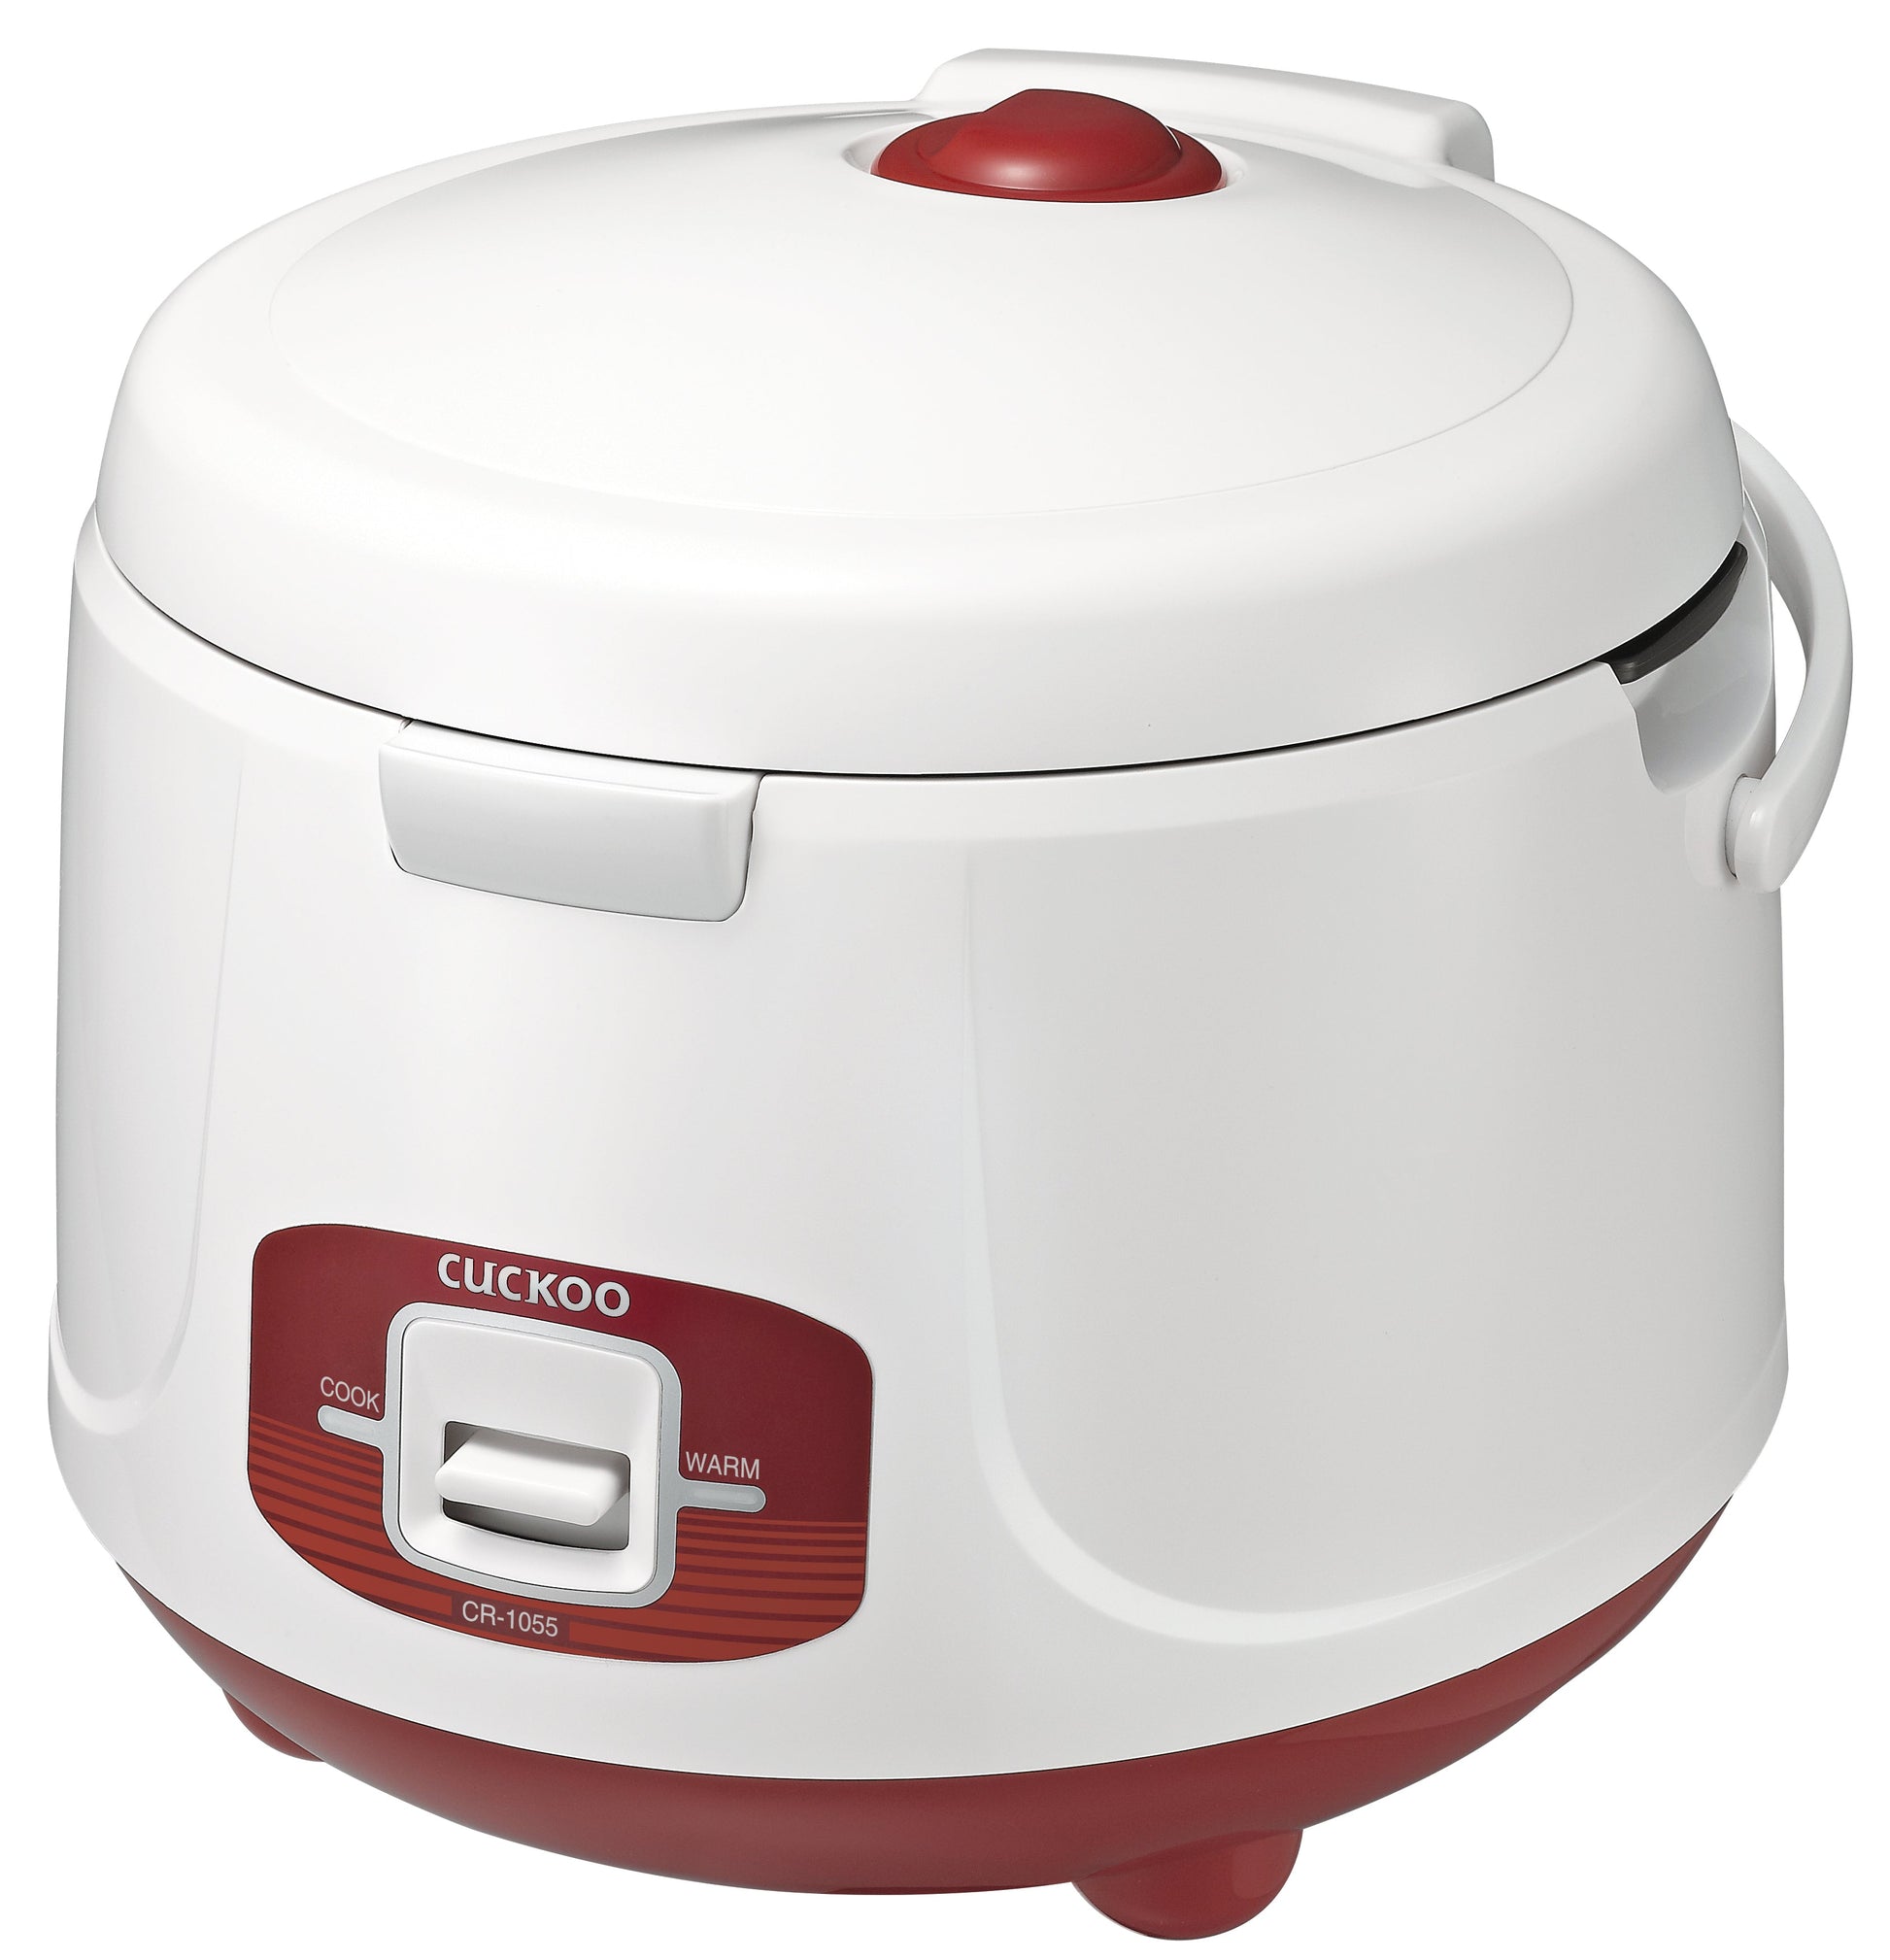 Electric Rice Cookers & Warmers